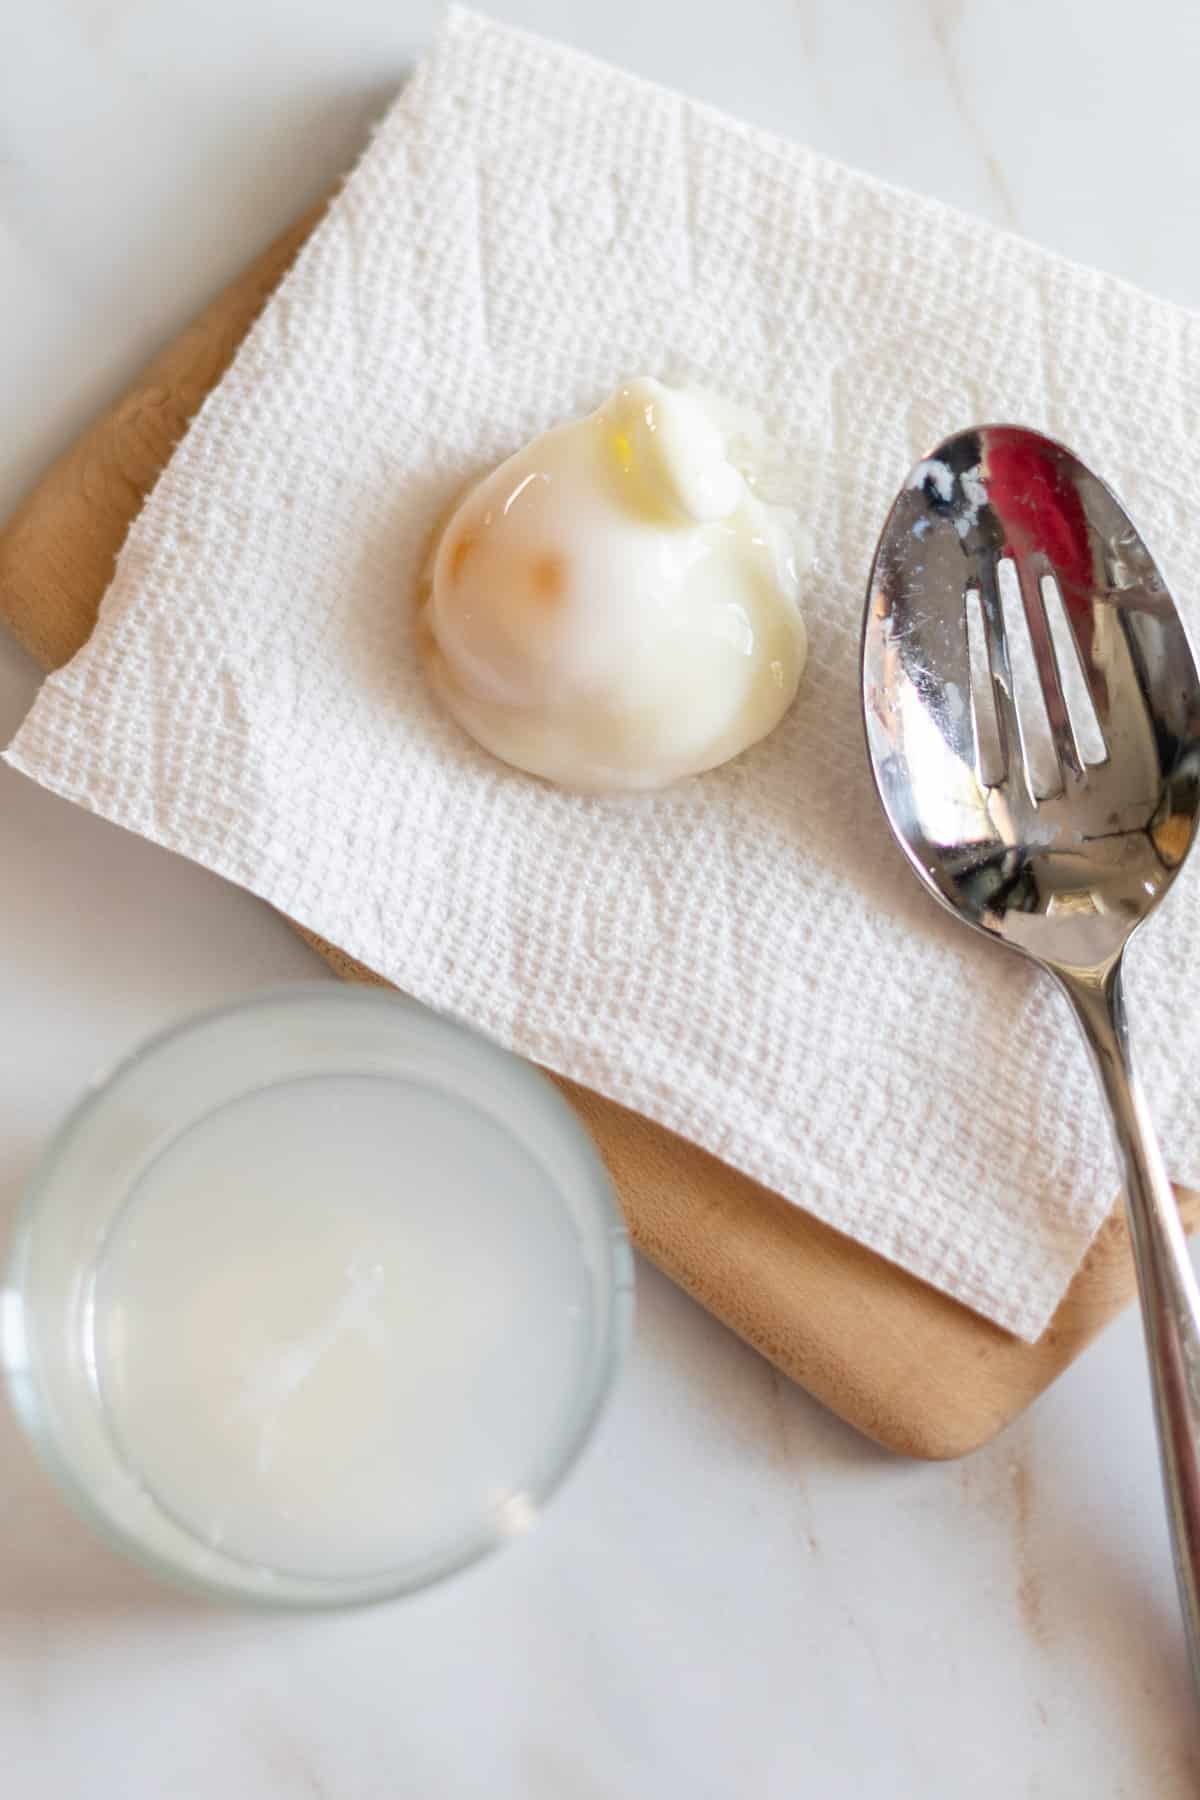 Poached egg draining on paper towel.